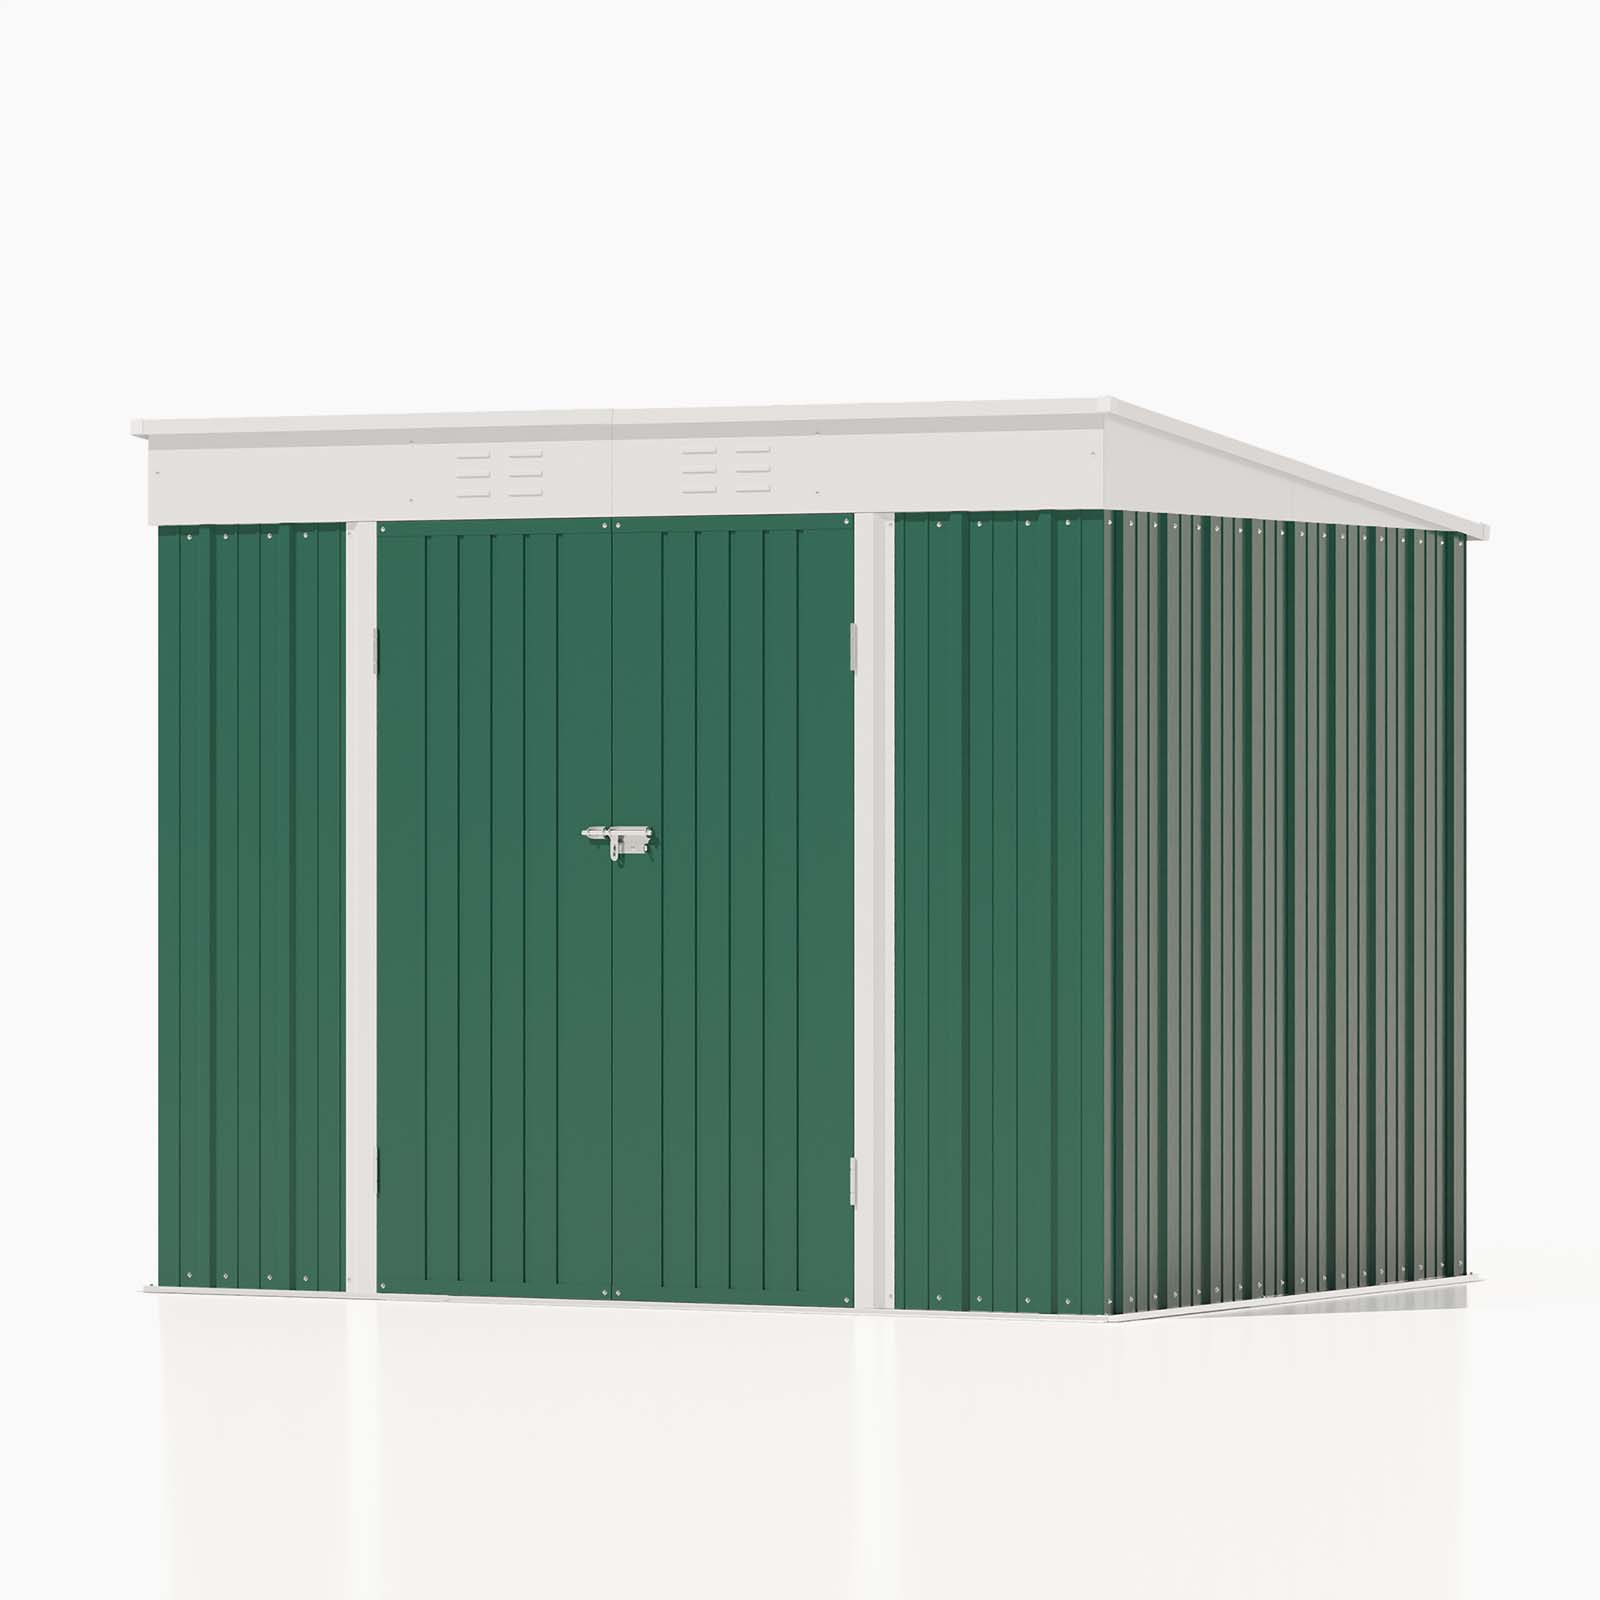 Patiowell 8x6 Metal Shed-Bottle Green